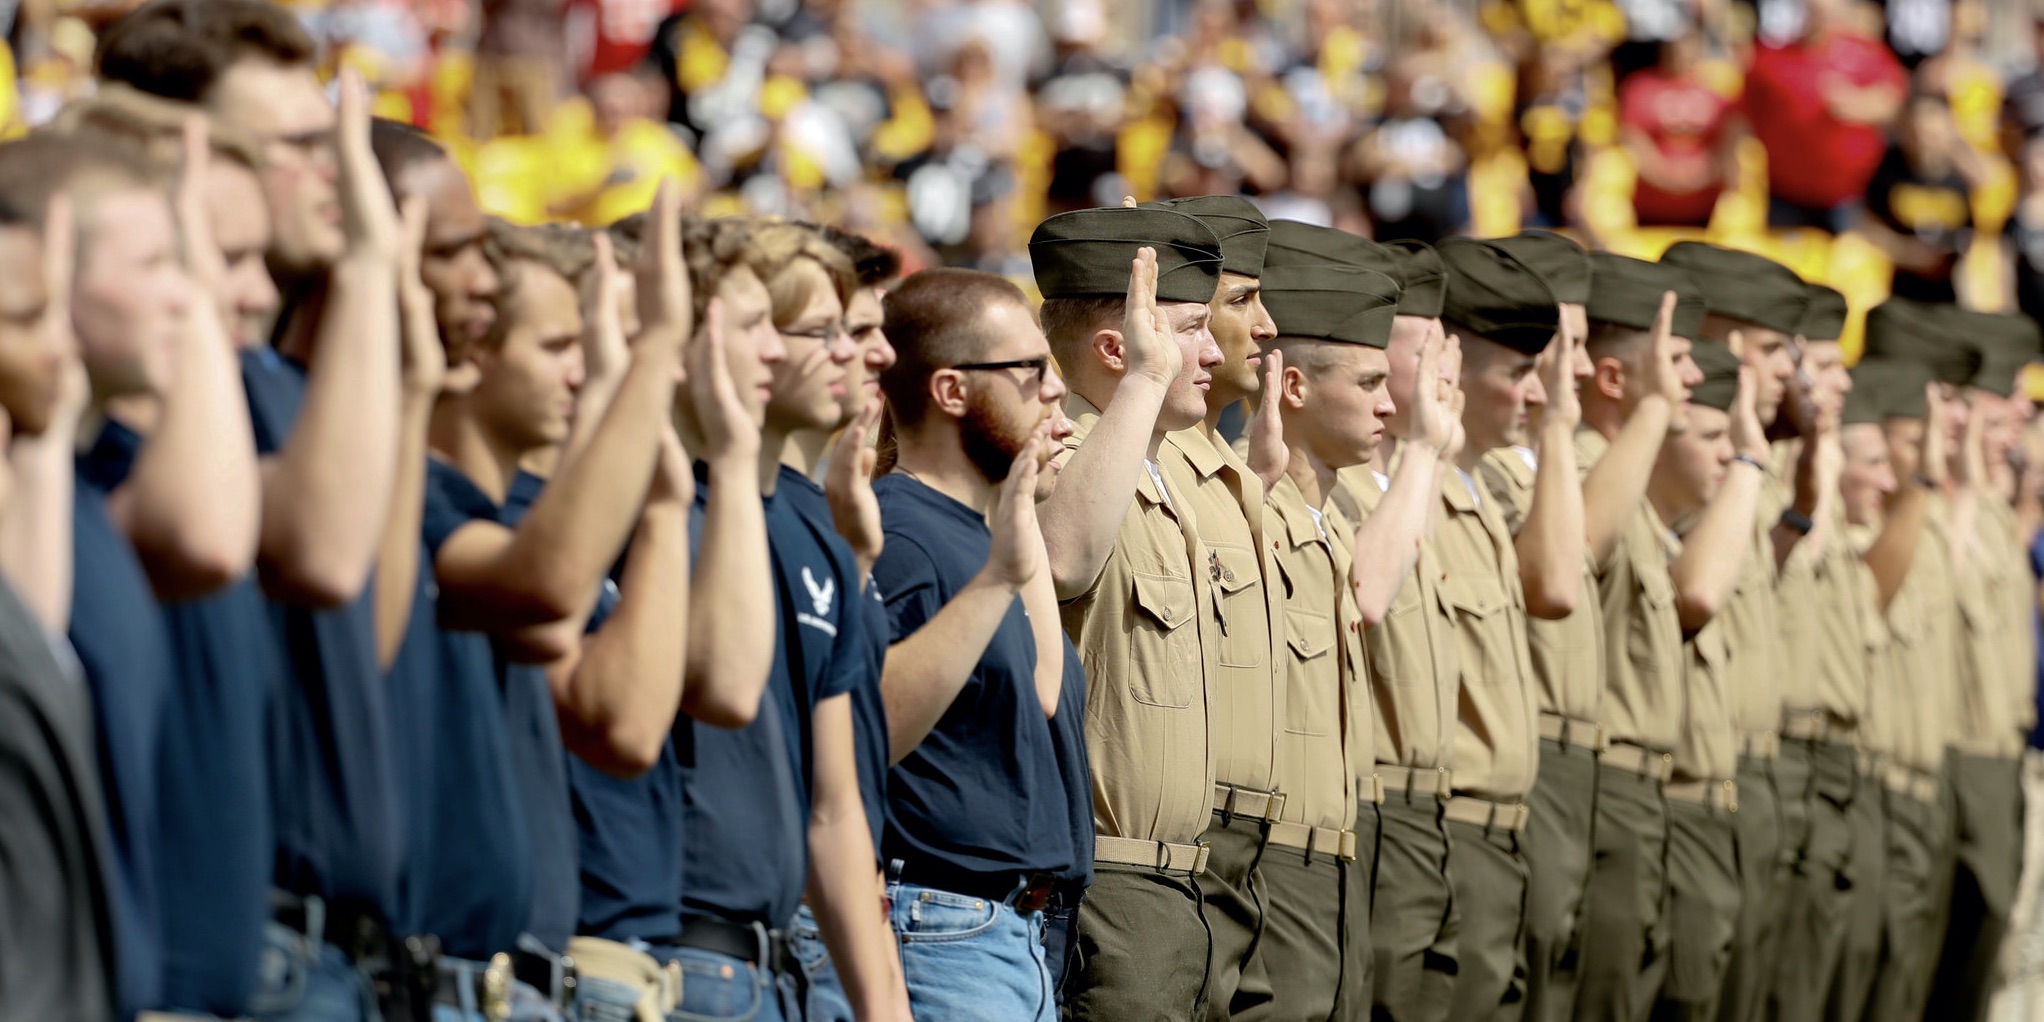 National and military services recruits in a row